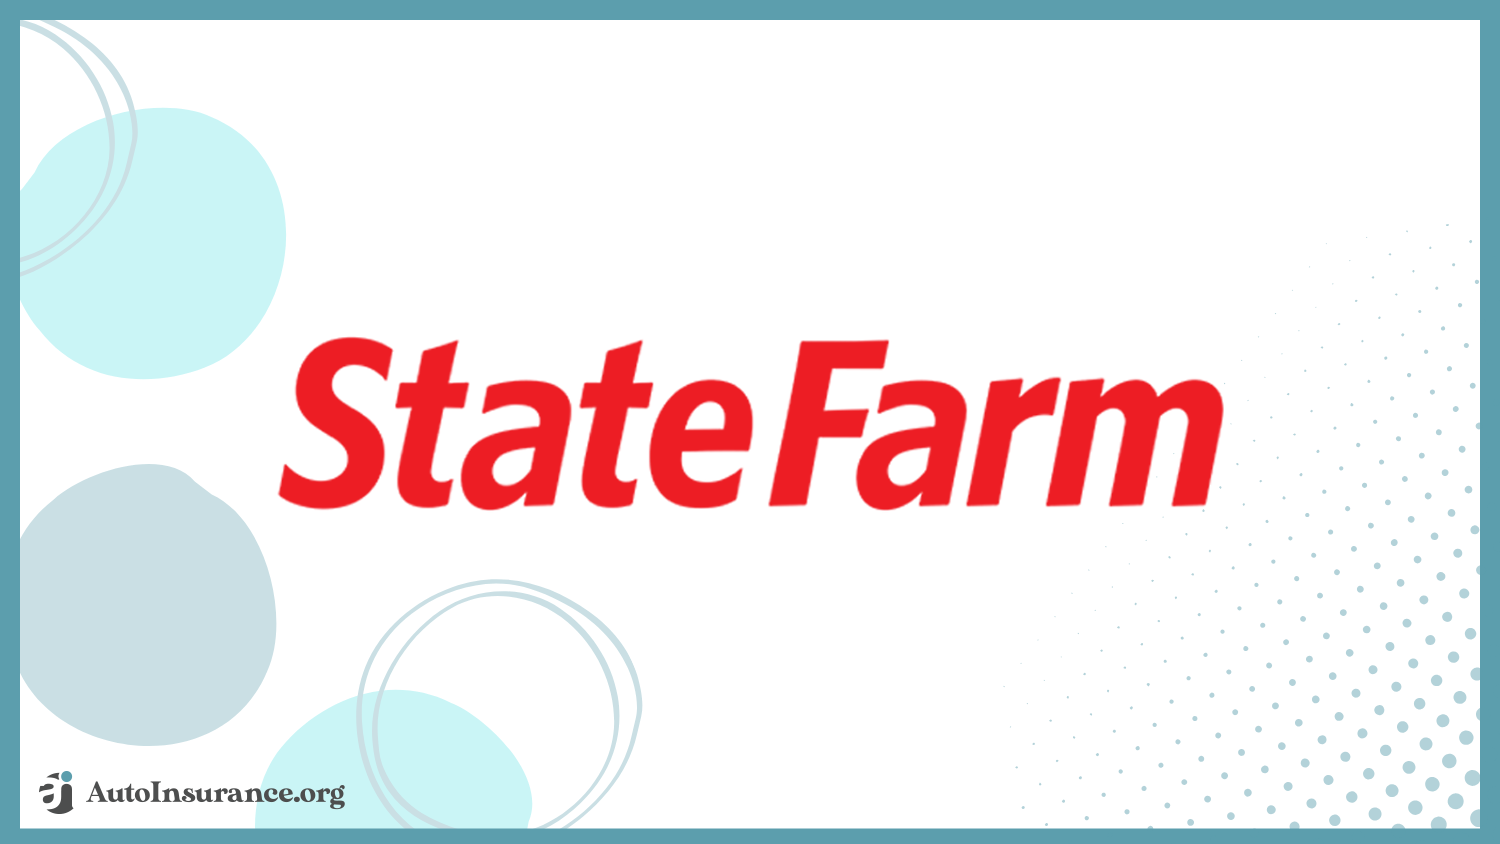 State Farm: Best Rental Auto Insurance That Covers Additional Drivers